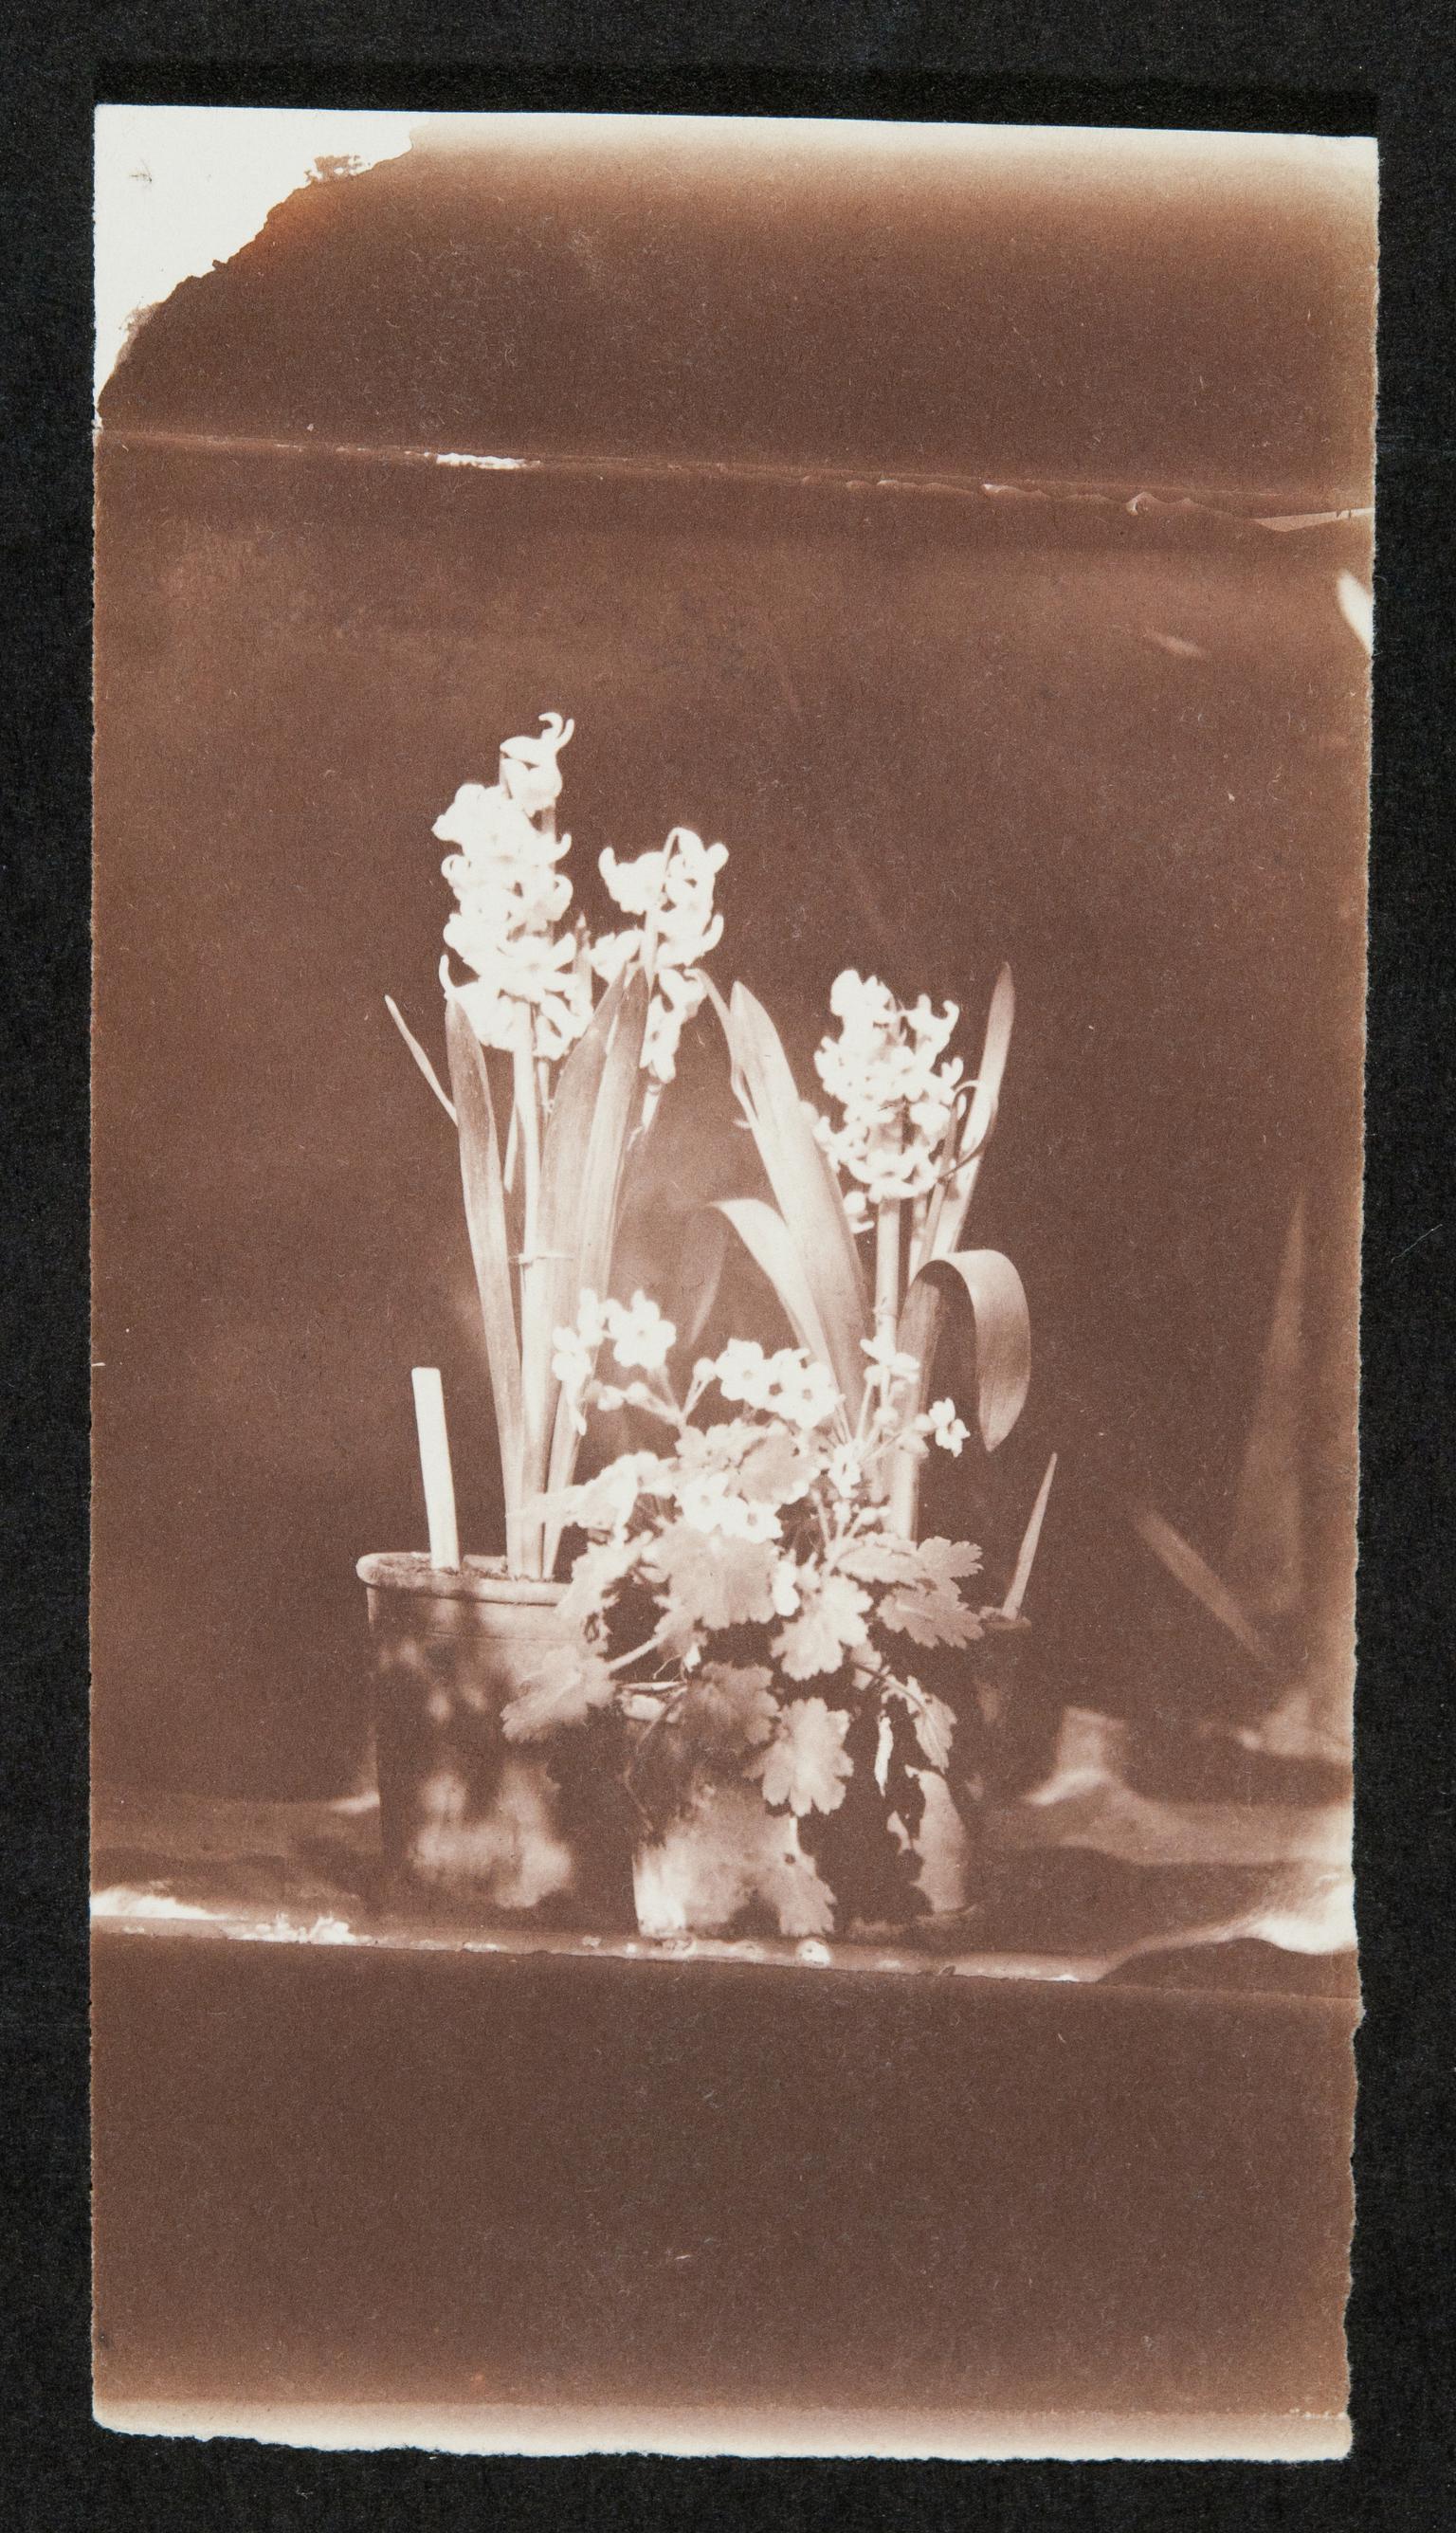 Pots of spring flowers, photograph